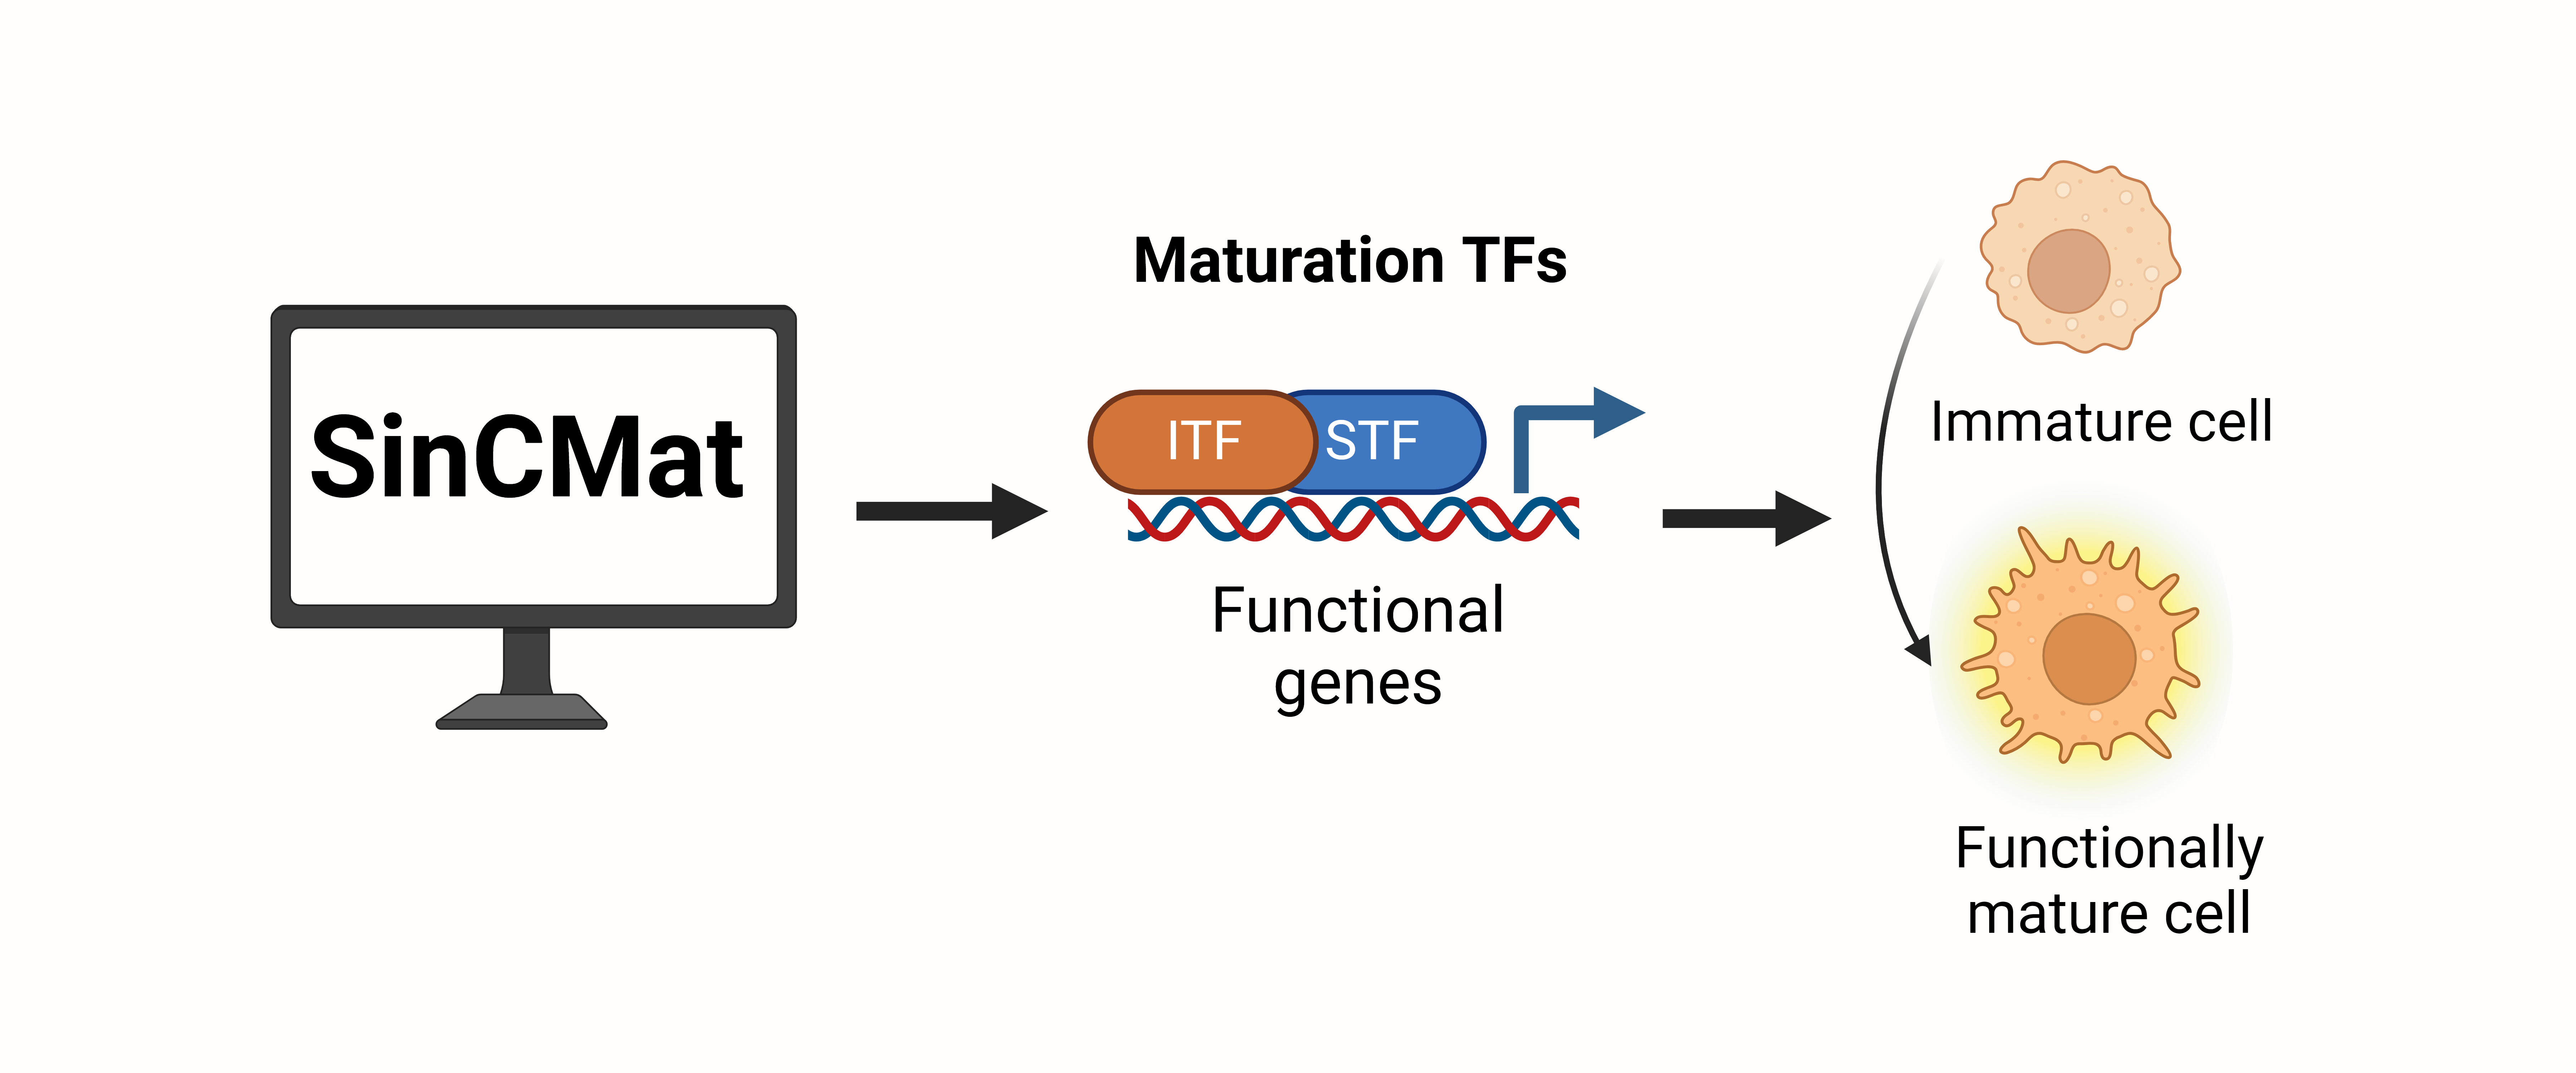 Figure showing that SinCMat ouptut are maturation TFs that target functional genes and its use to produce mature cells